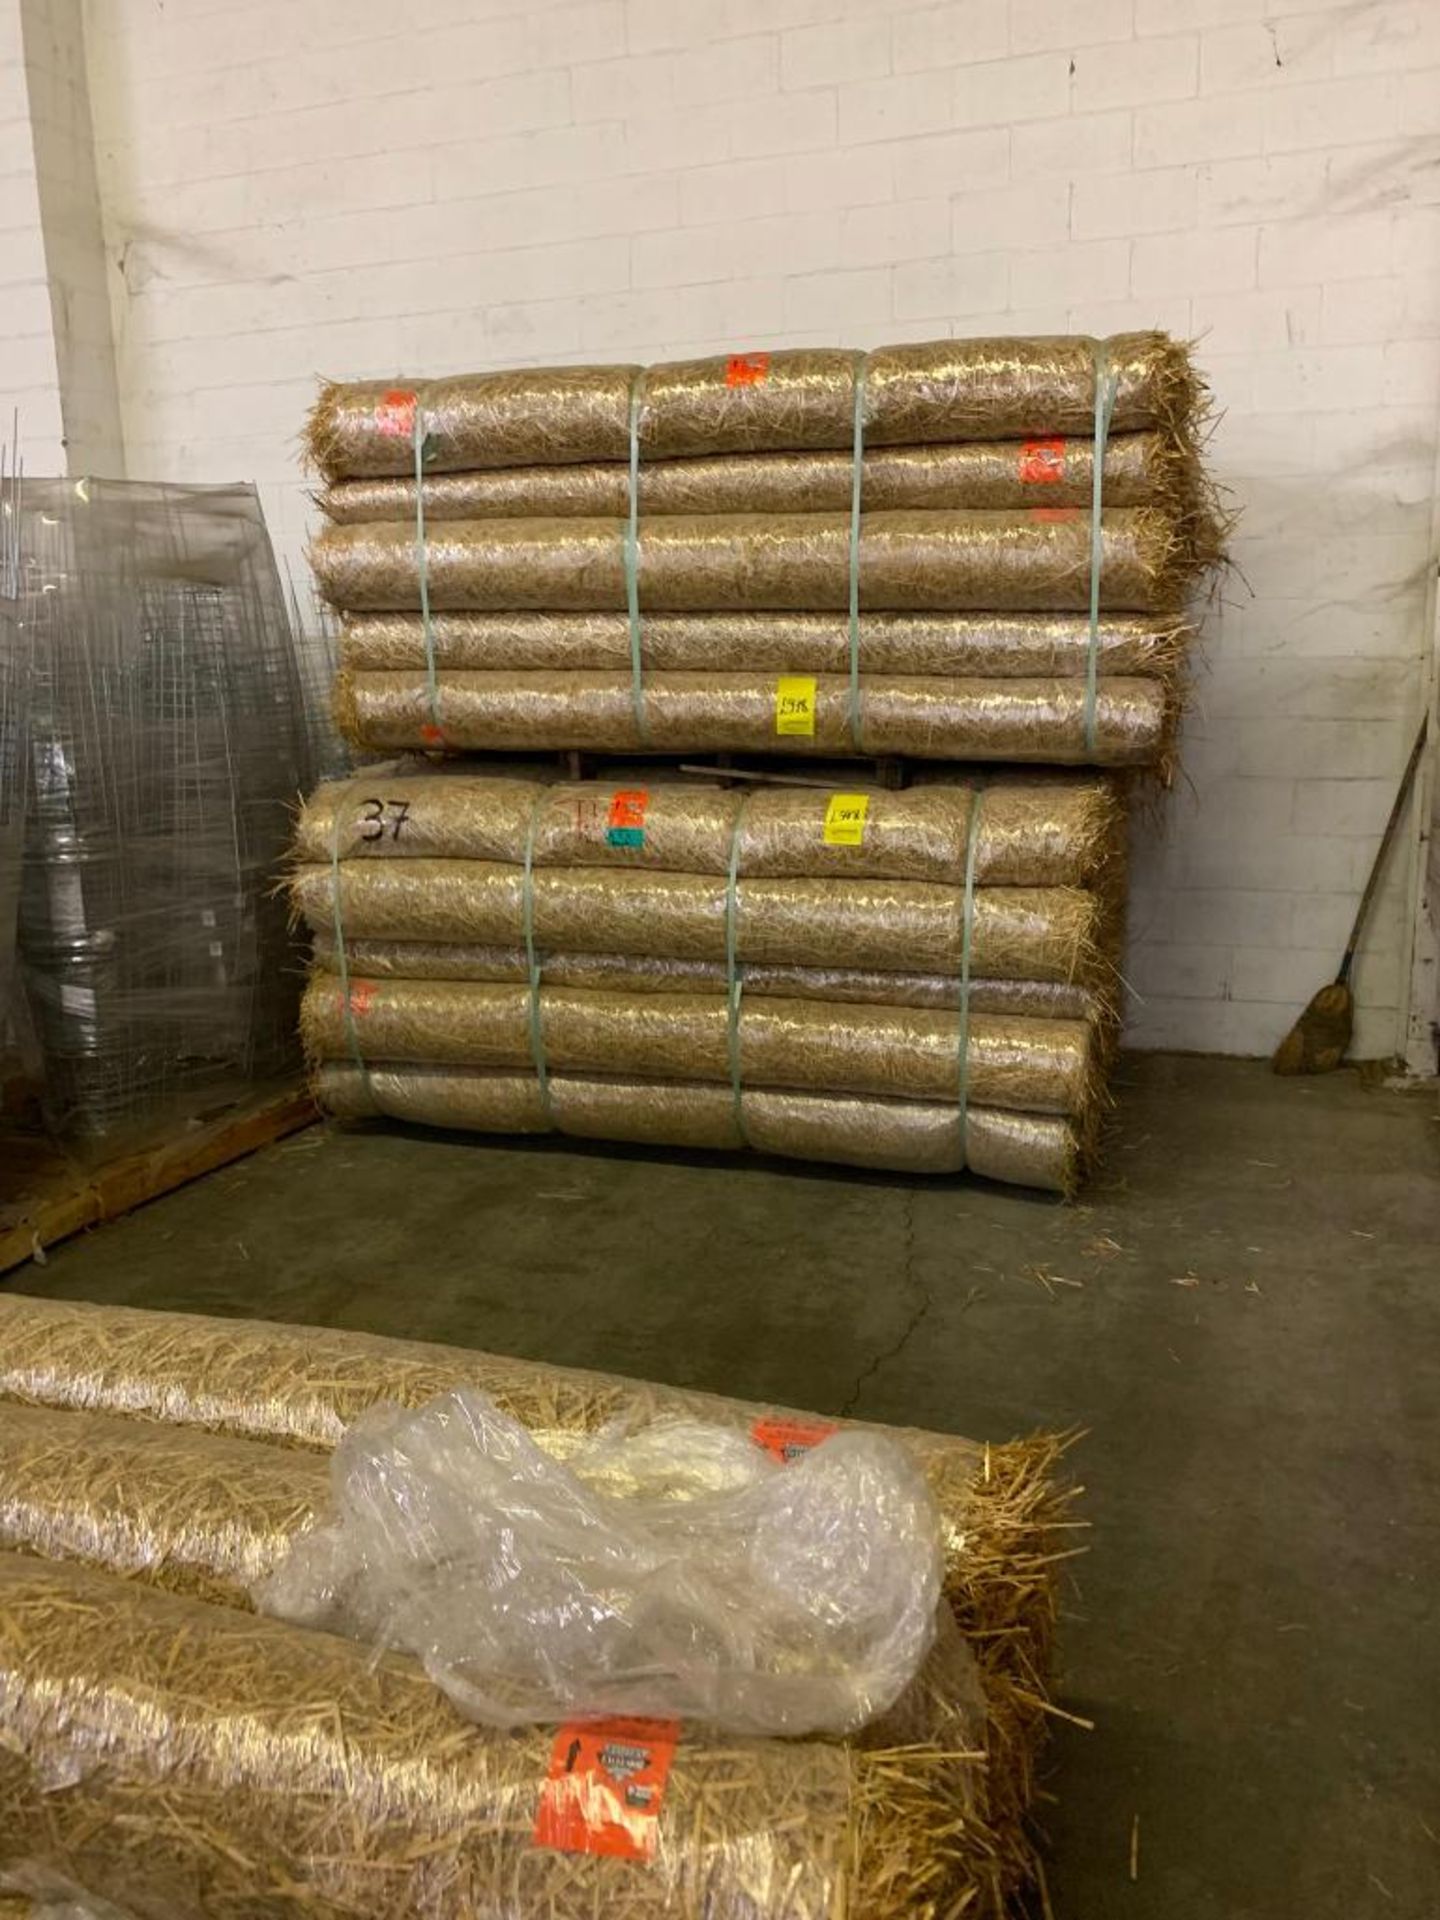 Mud Control Fabric Rolls, Straw Erosion Control Blankets, Netting, Wood Stakes - Image 2 of 10